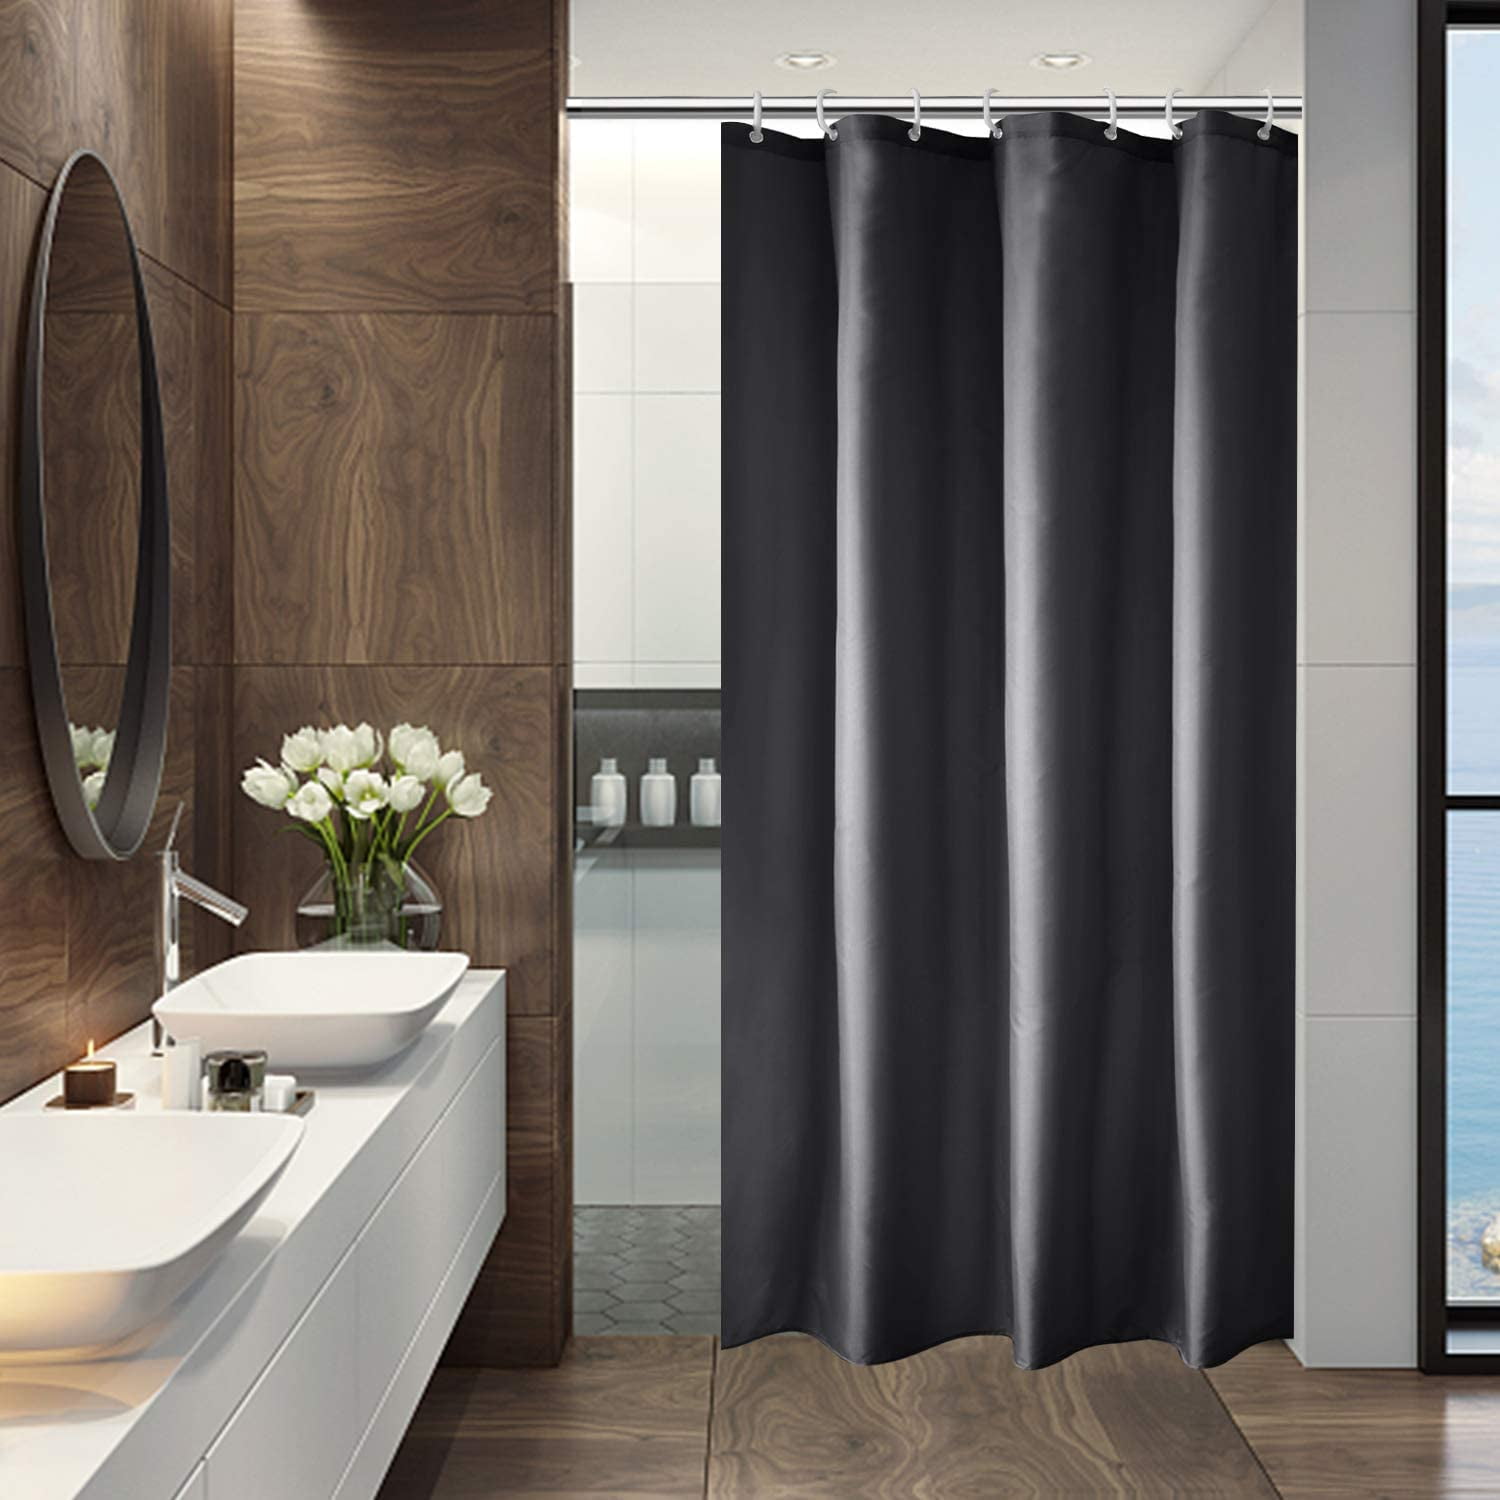 Gray White 48x72Inch Small Stall Size Elegant Geometric Shower Curtains Herringbone Fabric Polyester Bathroom Curtain Water Repellent and Waterproof